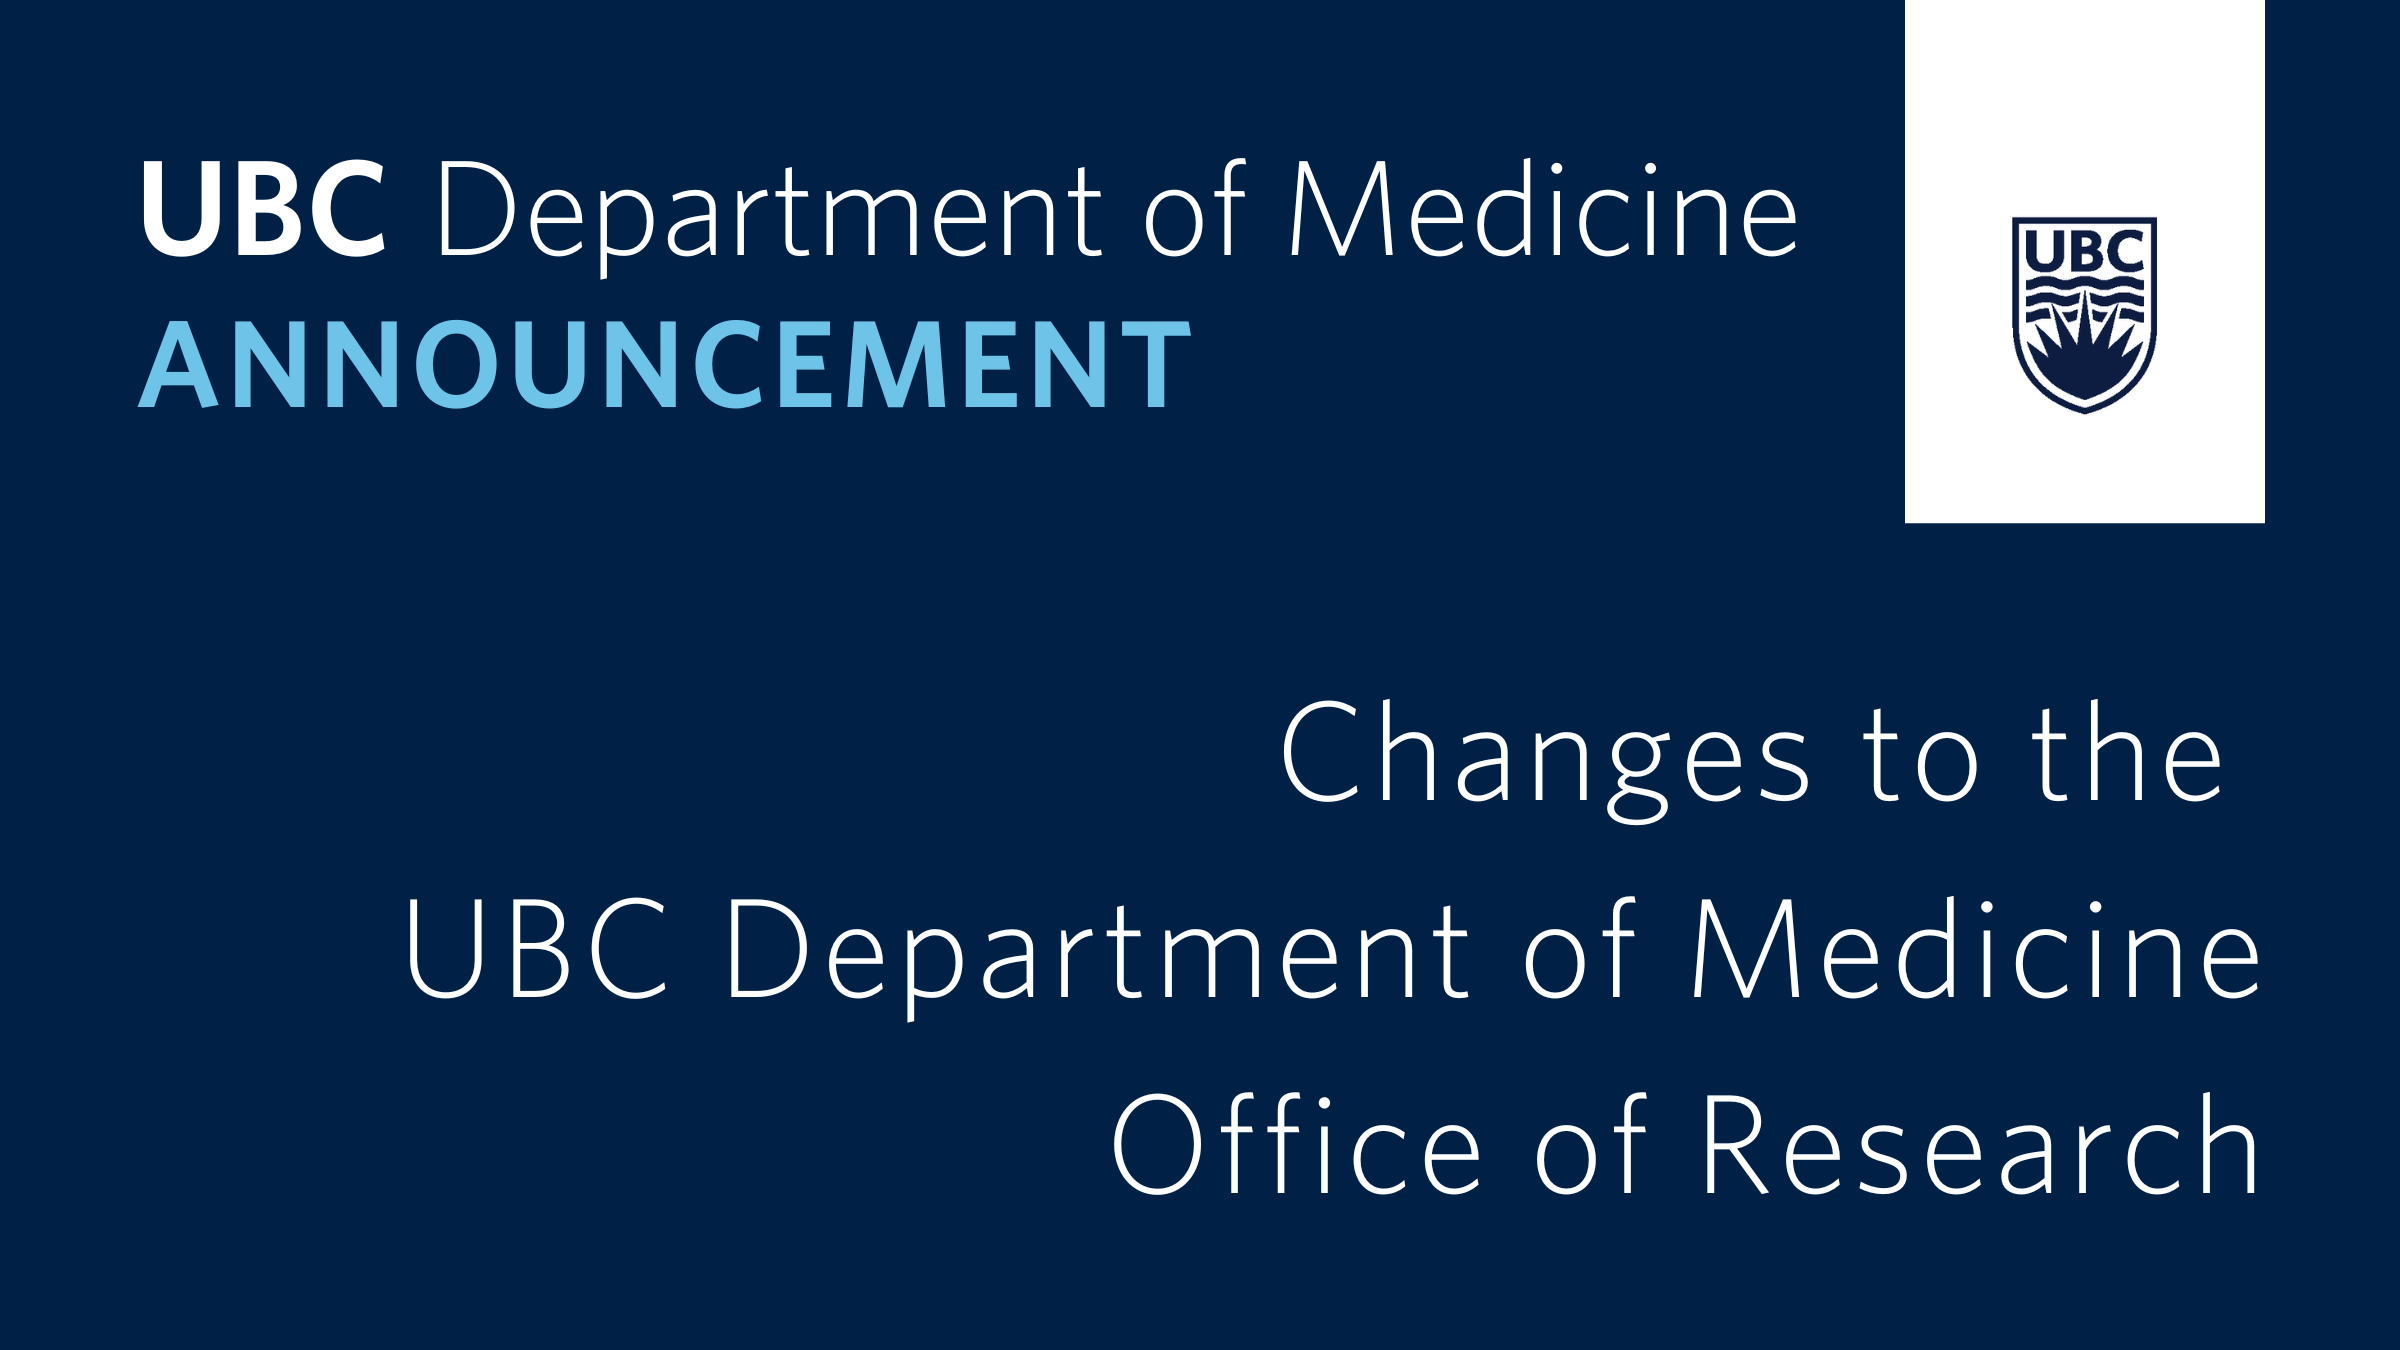 ANNOUNCEMENT: Changes to the UBC Department of Medicine Office of Research